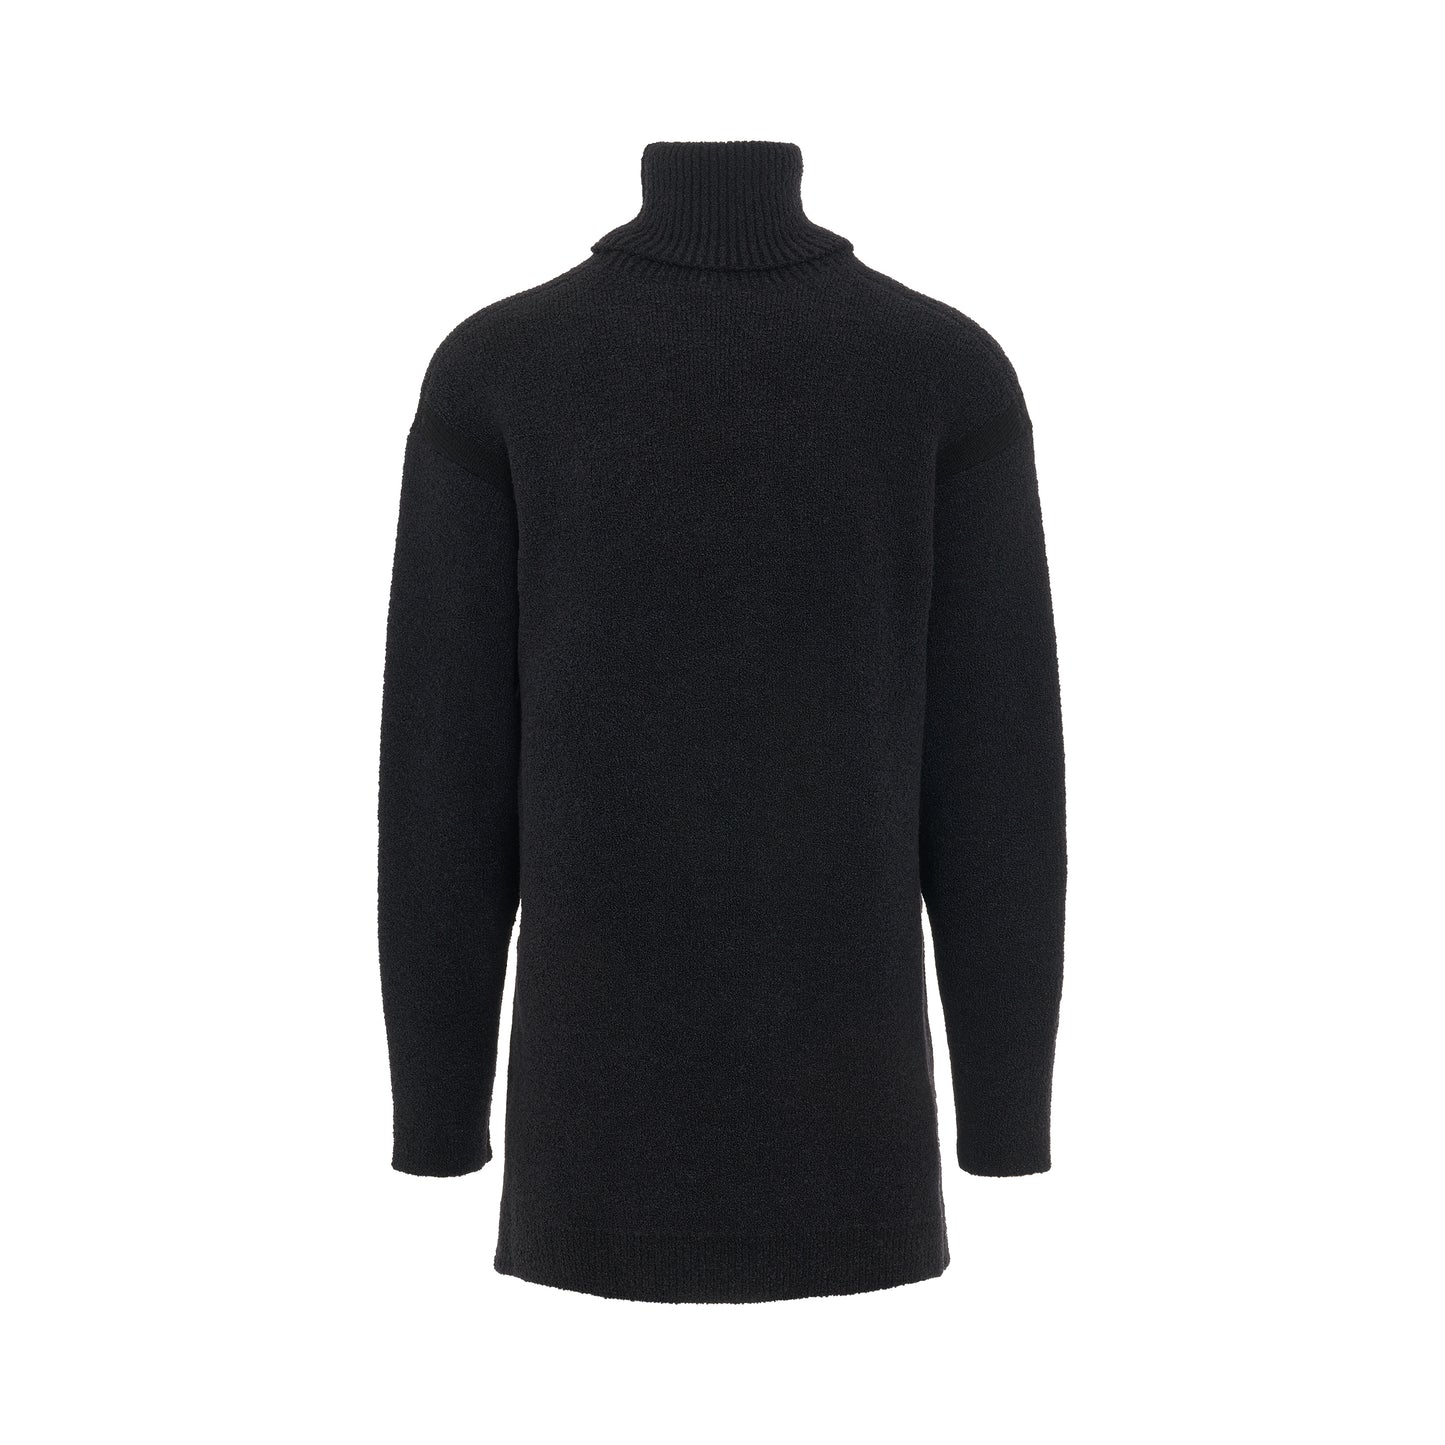 Micro Boucle Knit Turtleneck in Black